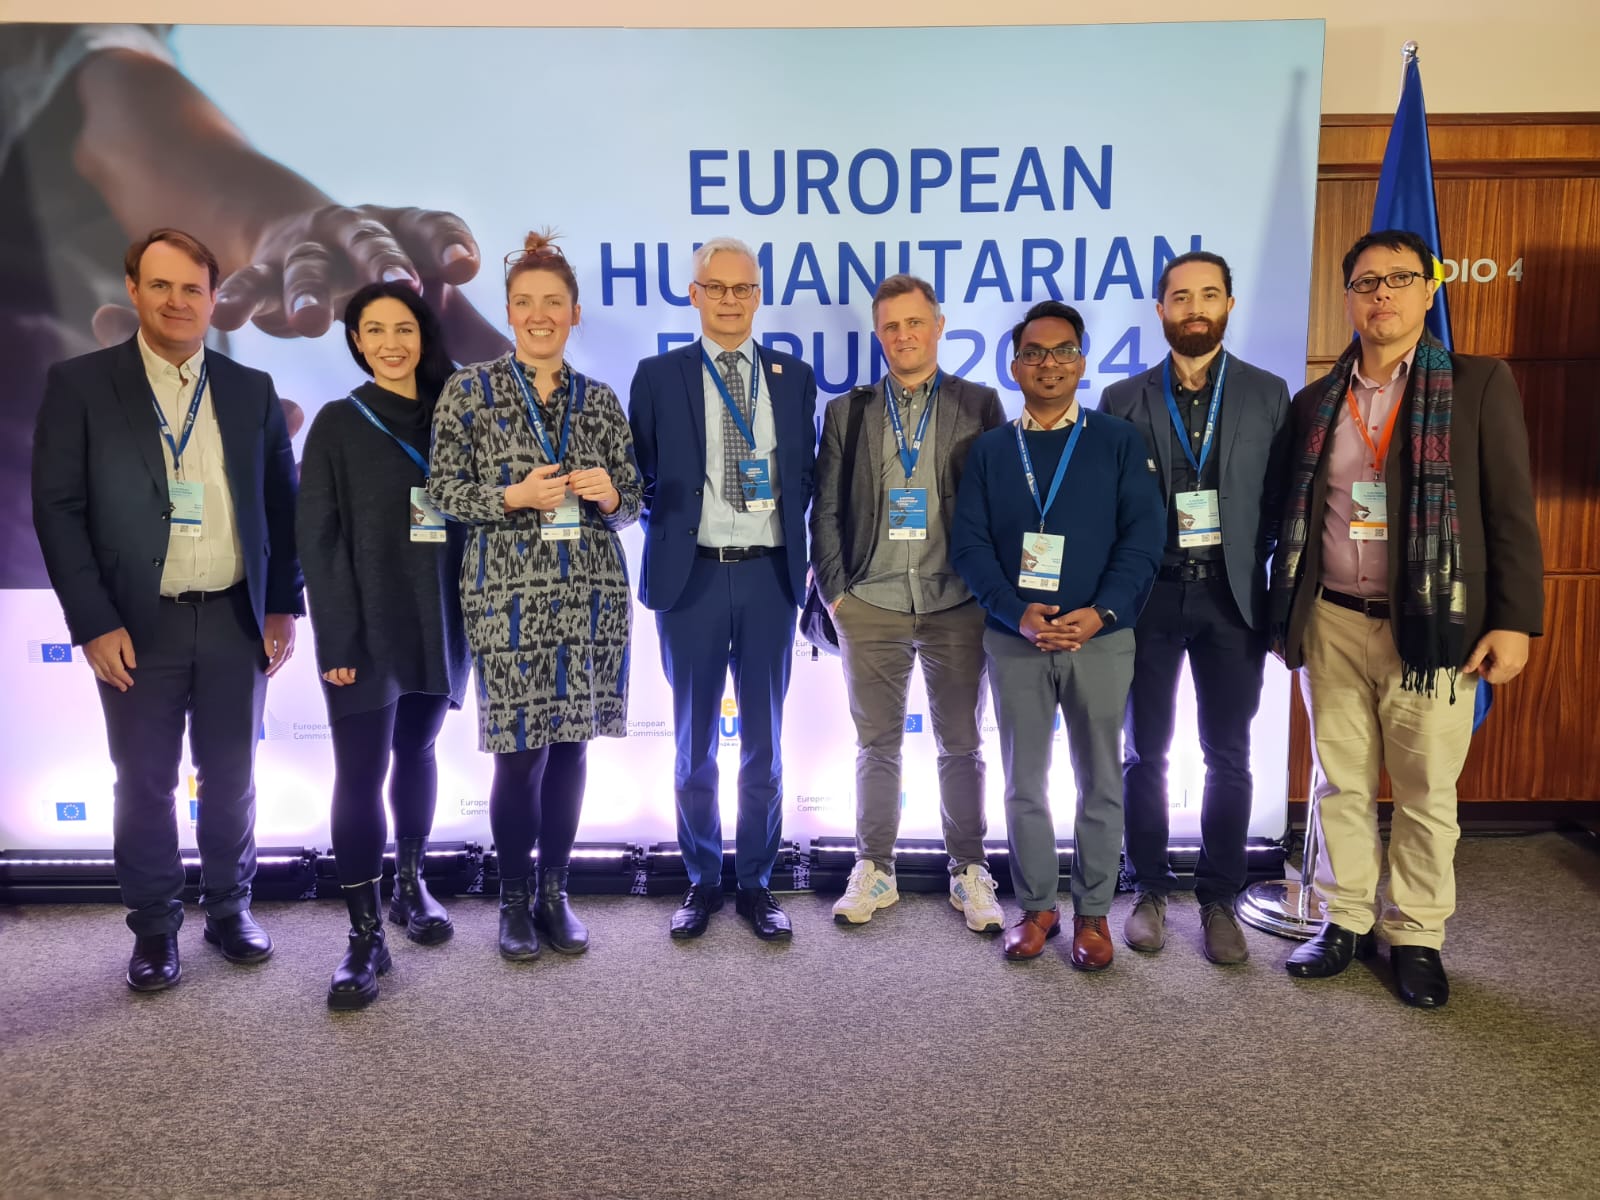 ADRA delegation at the European Humanitarian Forum 2024 in Brussels.